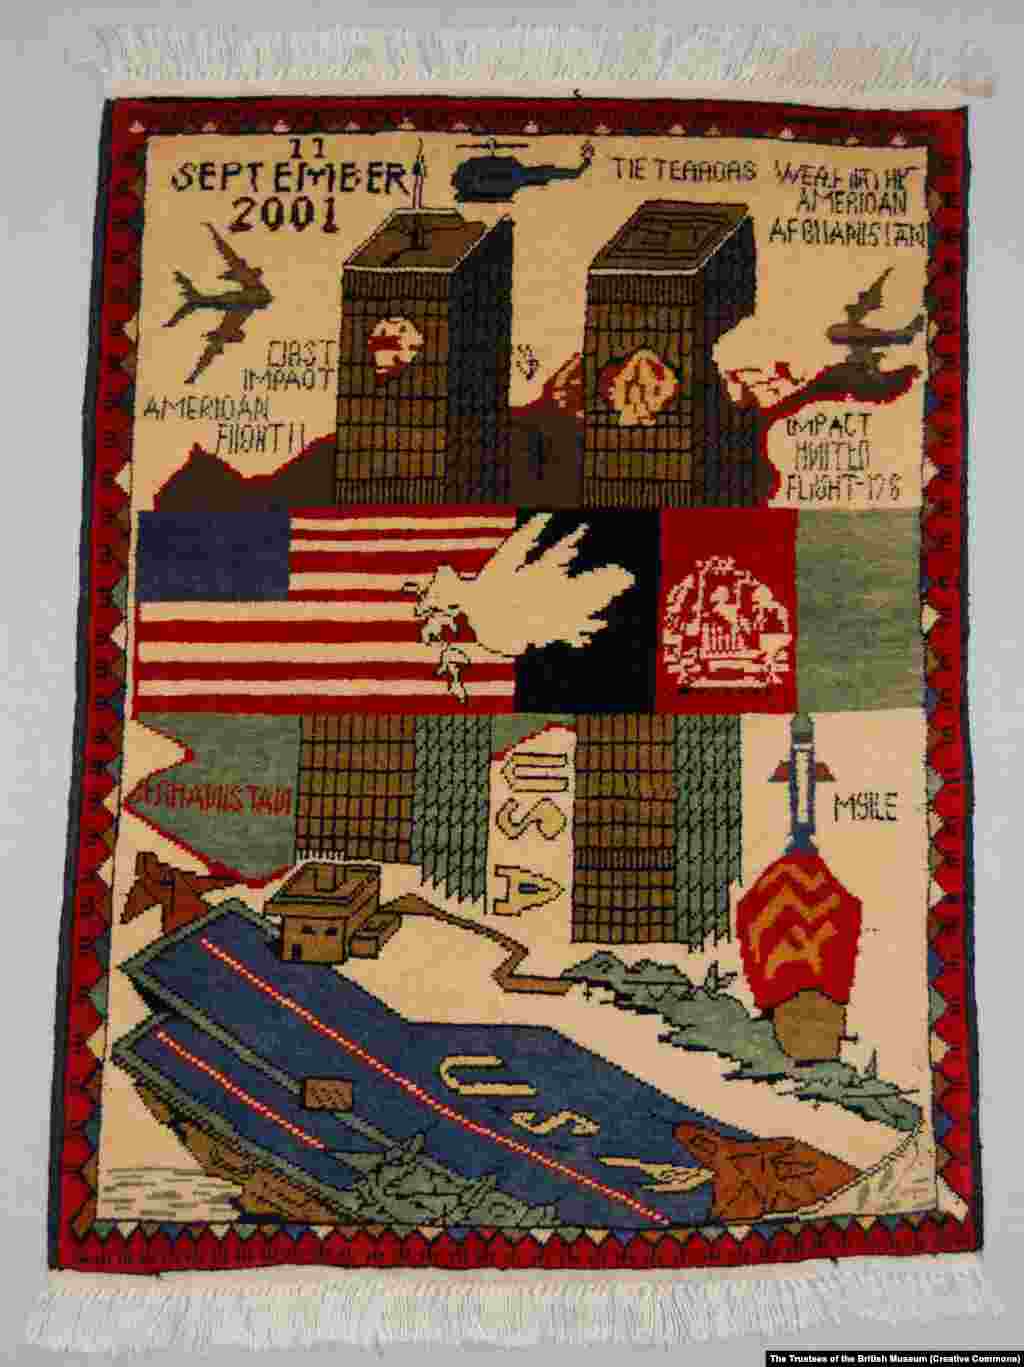 A depiction of the September 11, 2001, terrorist attacks includes two figures falling from the World Trade Center twin towers and a dove of peace between the U.S. and Afghan flags. &nbsp;